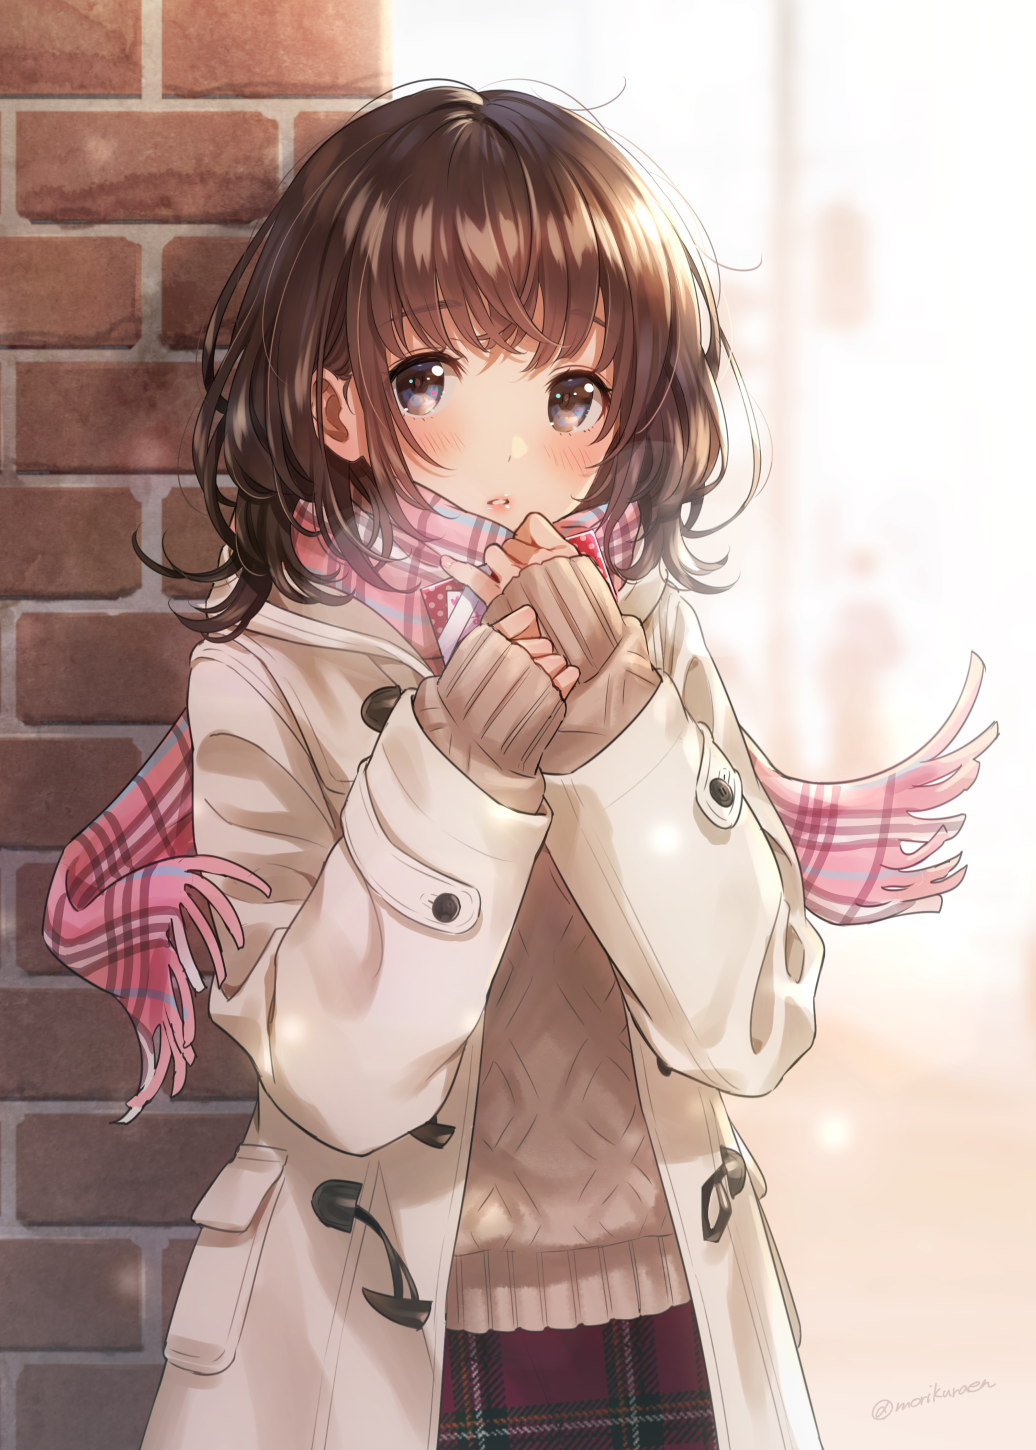 Anime Girls Original Characters Women Brunette Looking At Viewer Blushing Scarf Coats Sweater Cold V 1036x1450